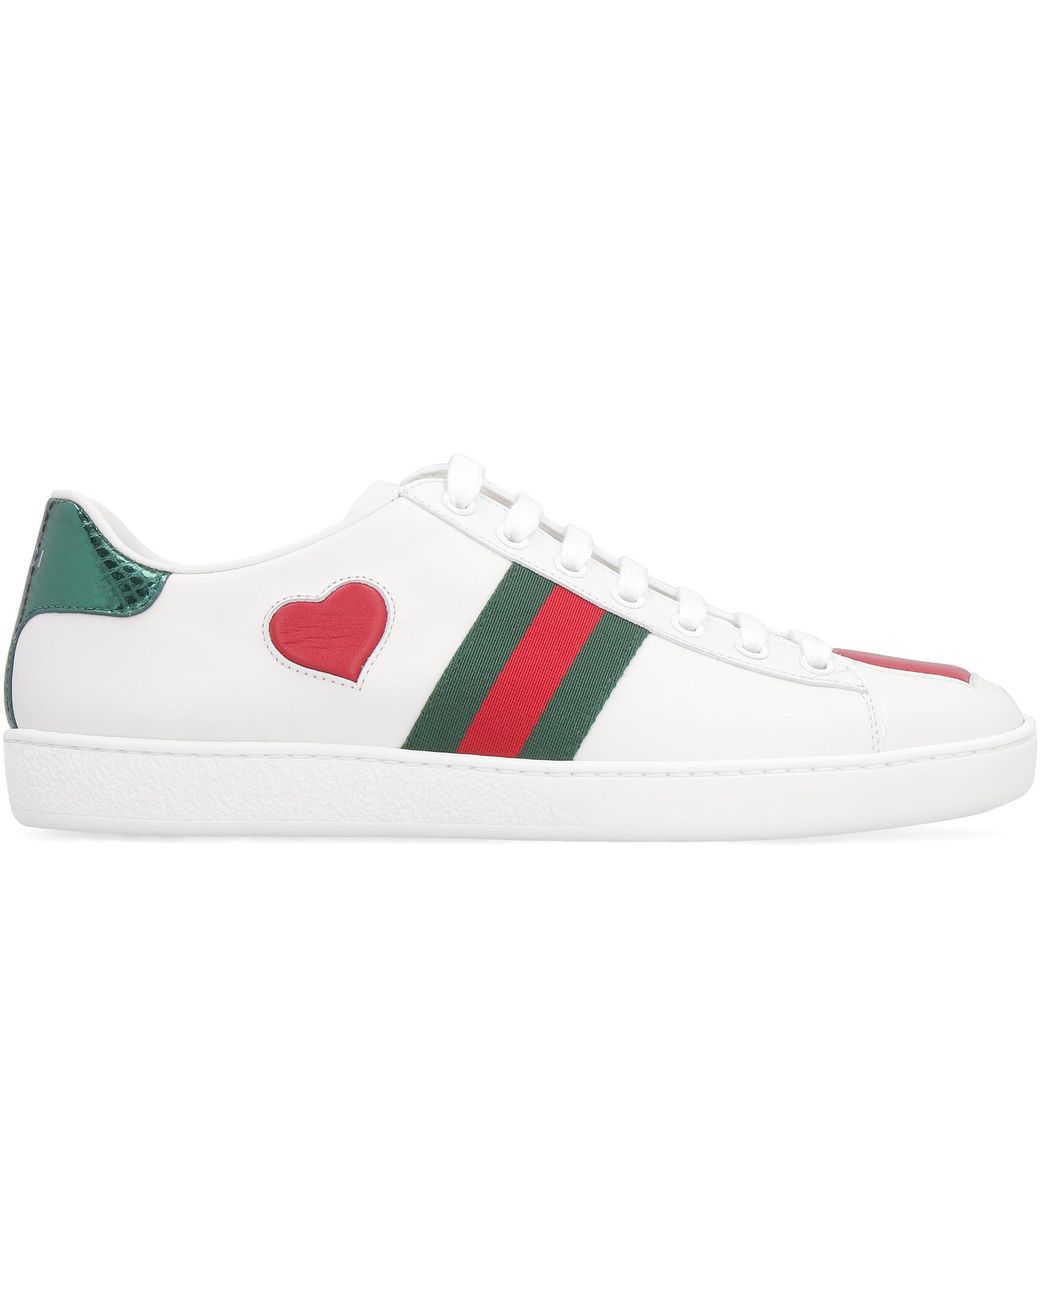 heart gucci sneakers